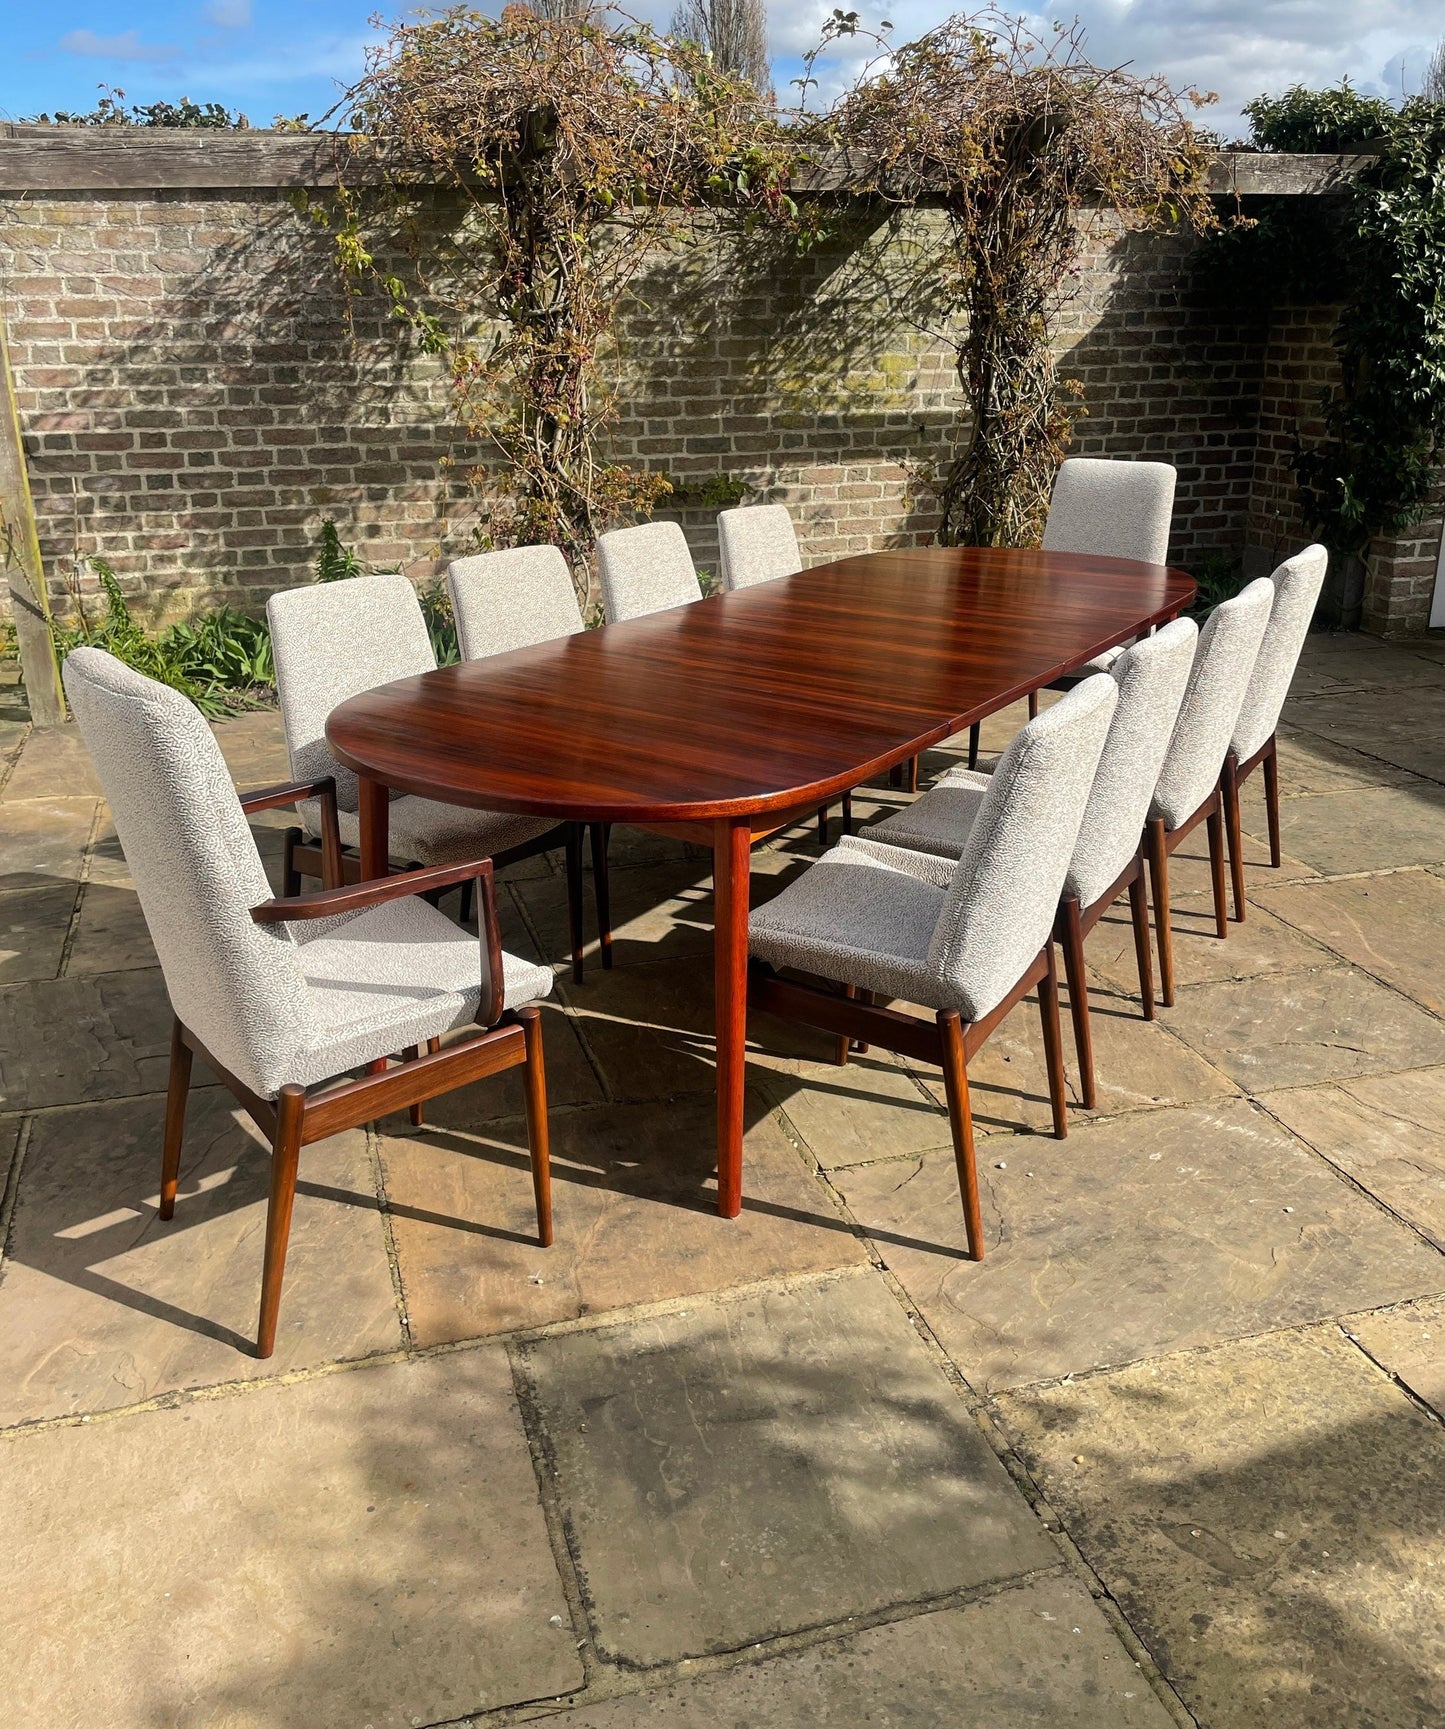 For Yuliya*** Final payment including shipping For Set Of 10 Rosewood Dining Chairs 8 chairs and 2 carversby Robert Heritage for Archie Shine Mid Century Modern 1950s